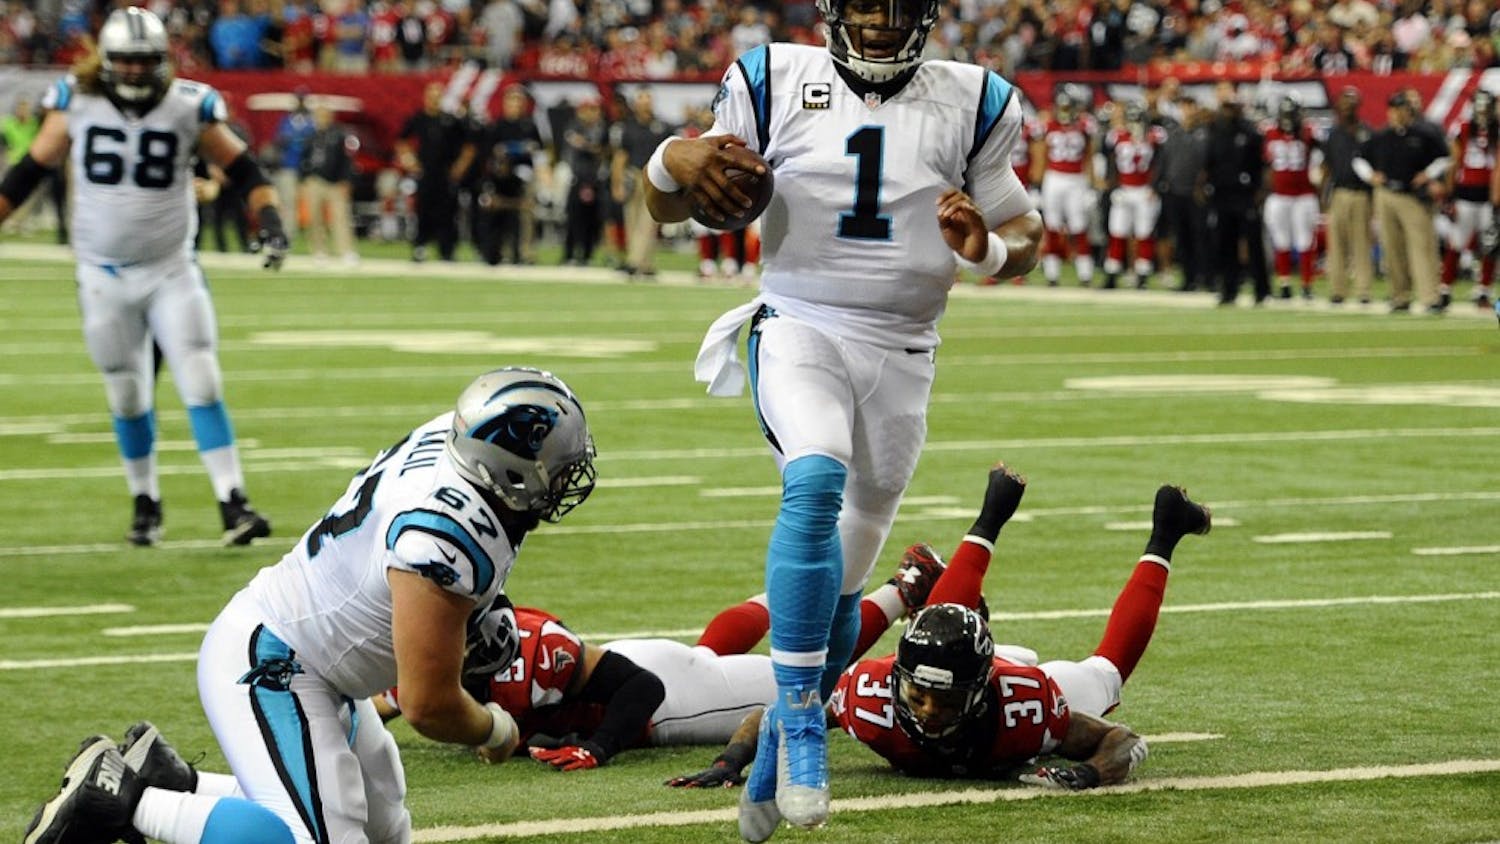 Carolina Panthers&apos; Cam Newton (1) runs into the end zone for a touchdown past Atlanta Falcons&apos; Ricardo Allen (37) during the first quarter on Sunday, Dec. 27, 2015, at Georgia Dome in Atlanta. (David T. Foster III/Charlotte Observer/TNS)